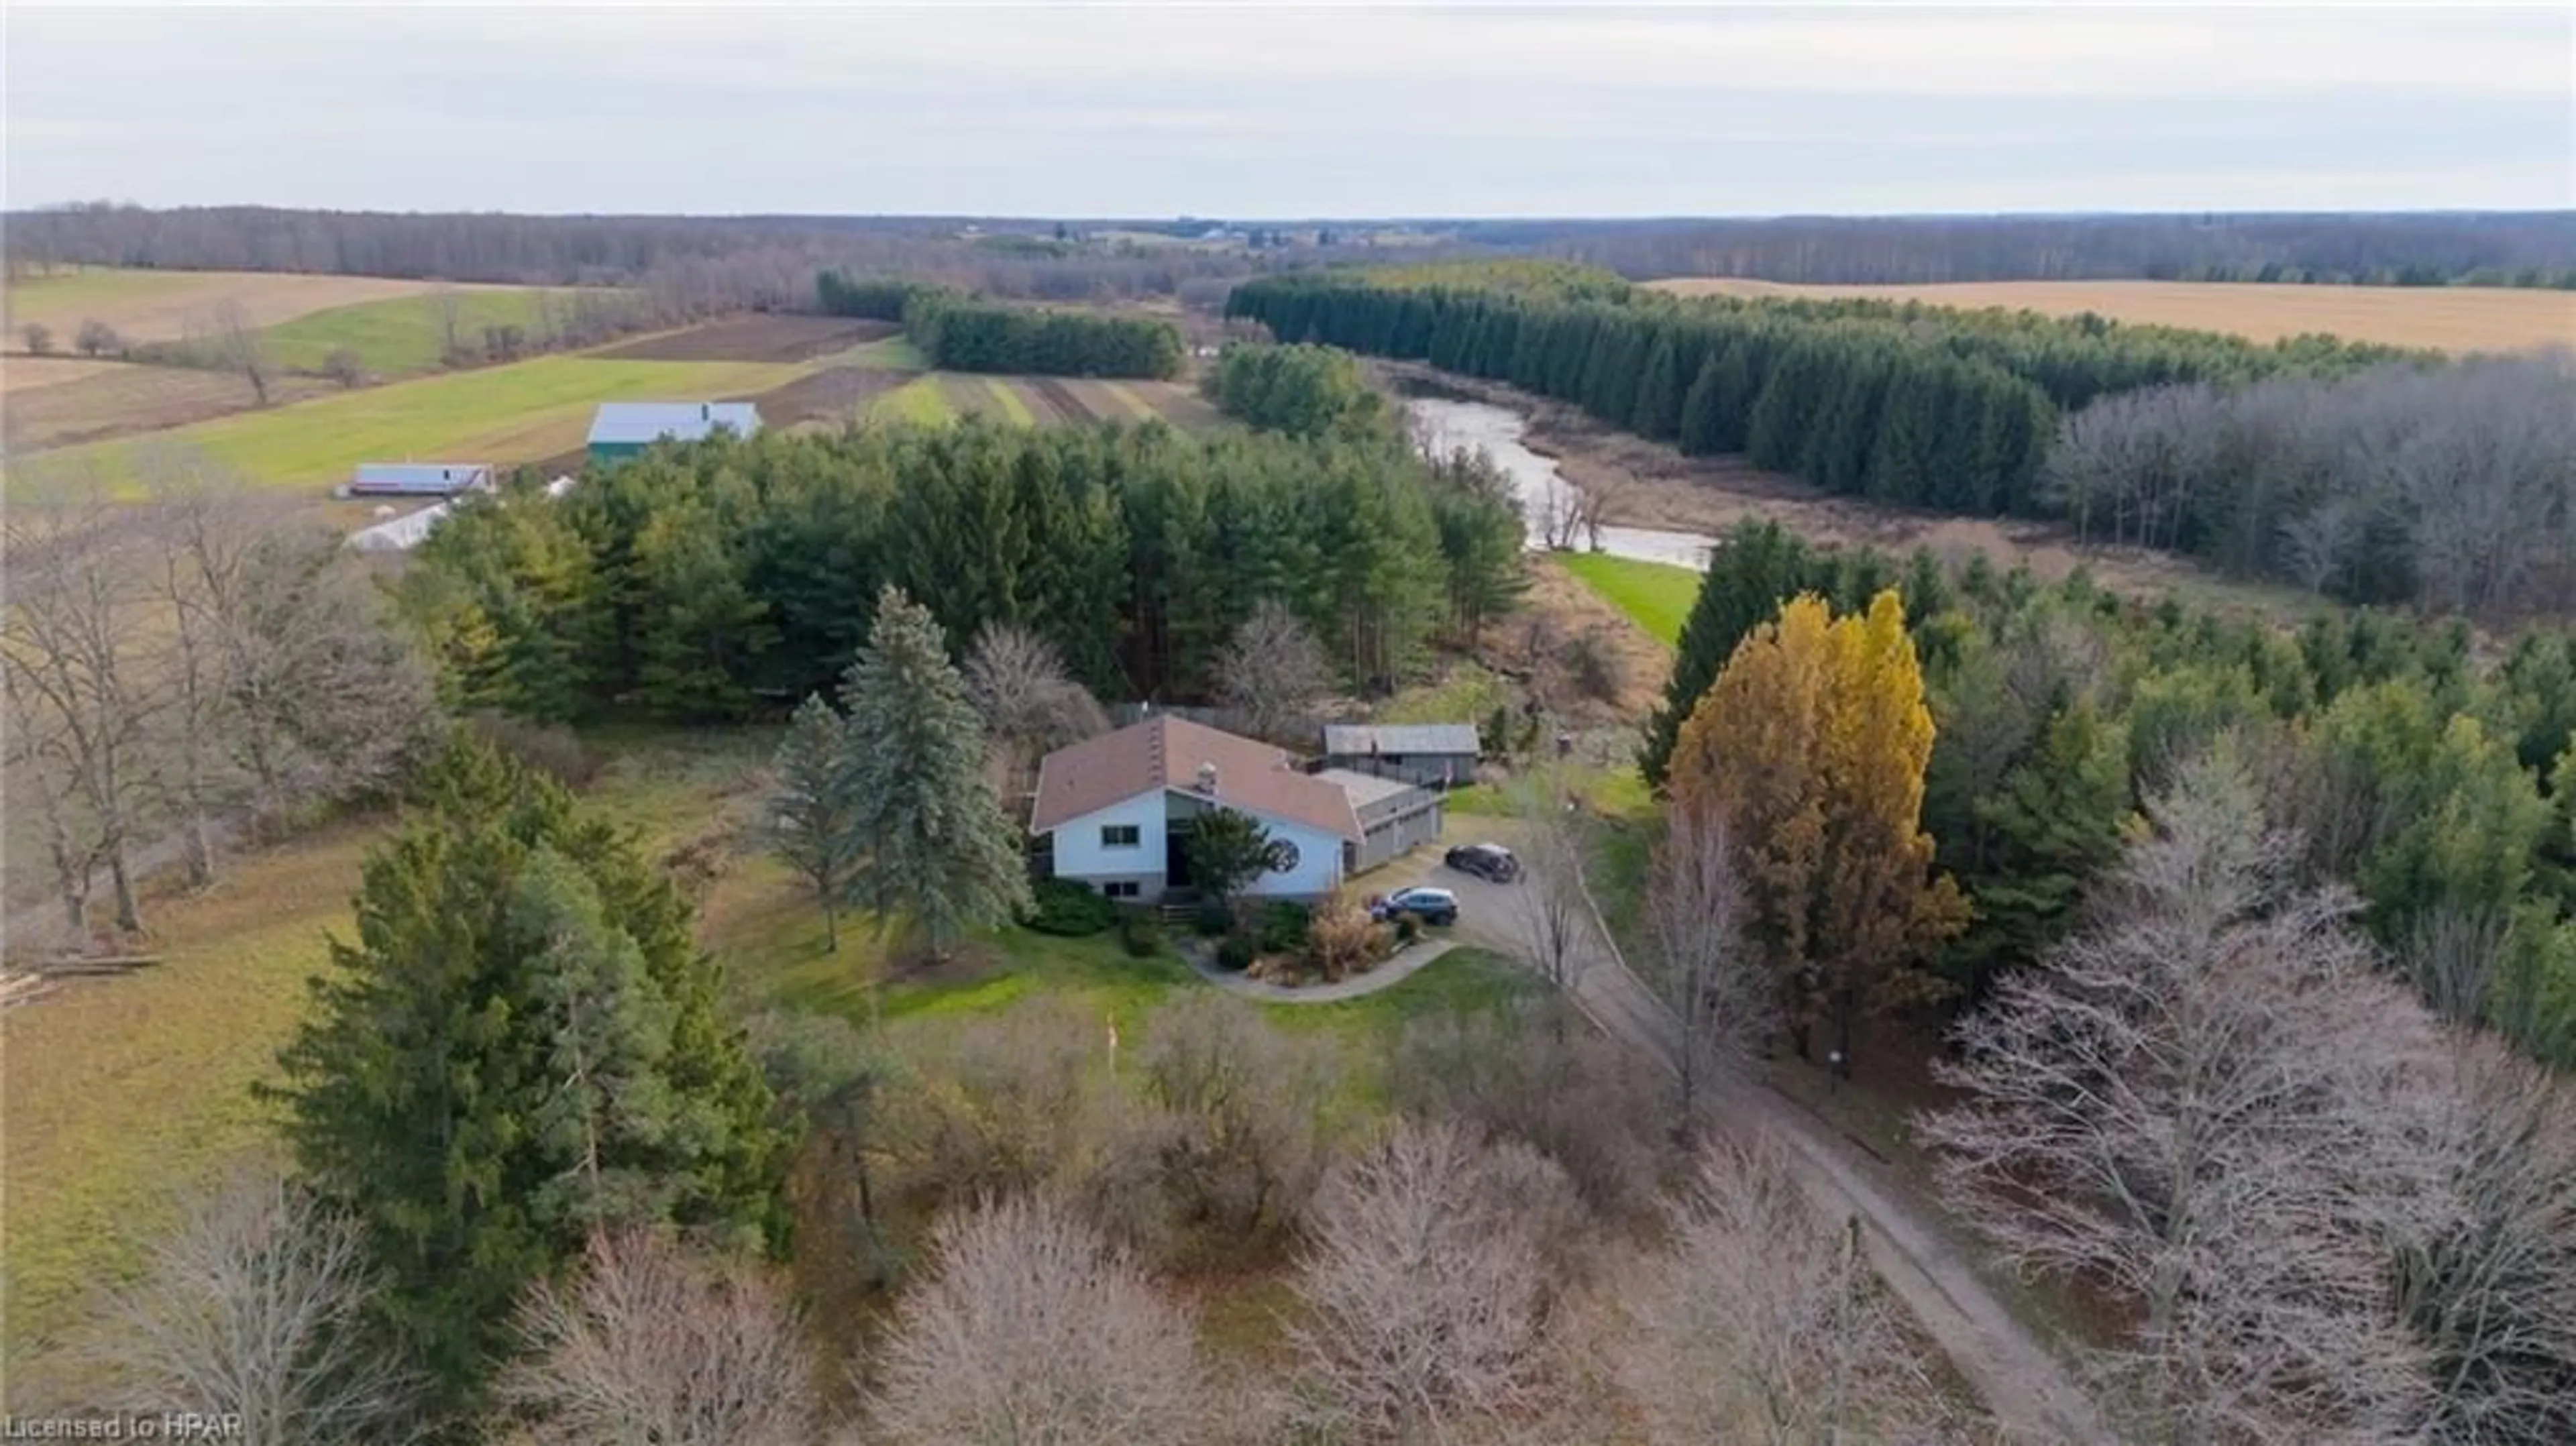 Cottage for 40481 Howick-Turnberry Rd, Morris-Turnberry Ontario N0G 2W0